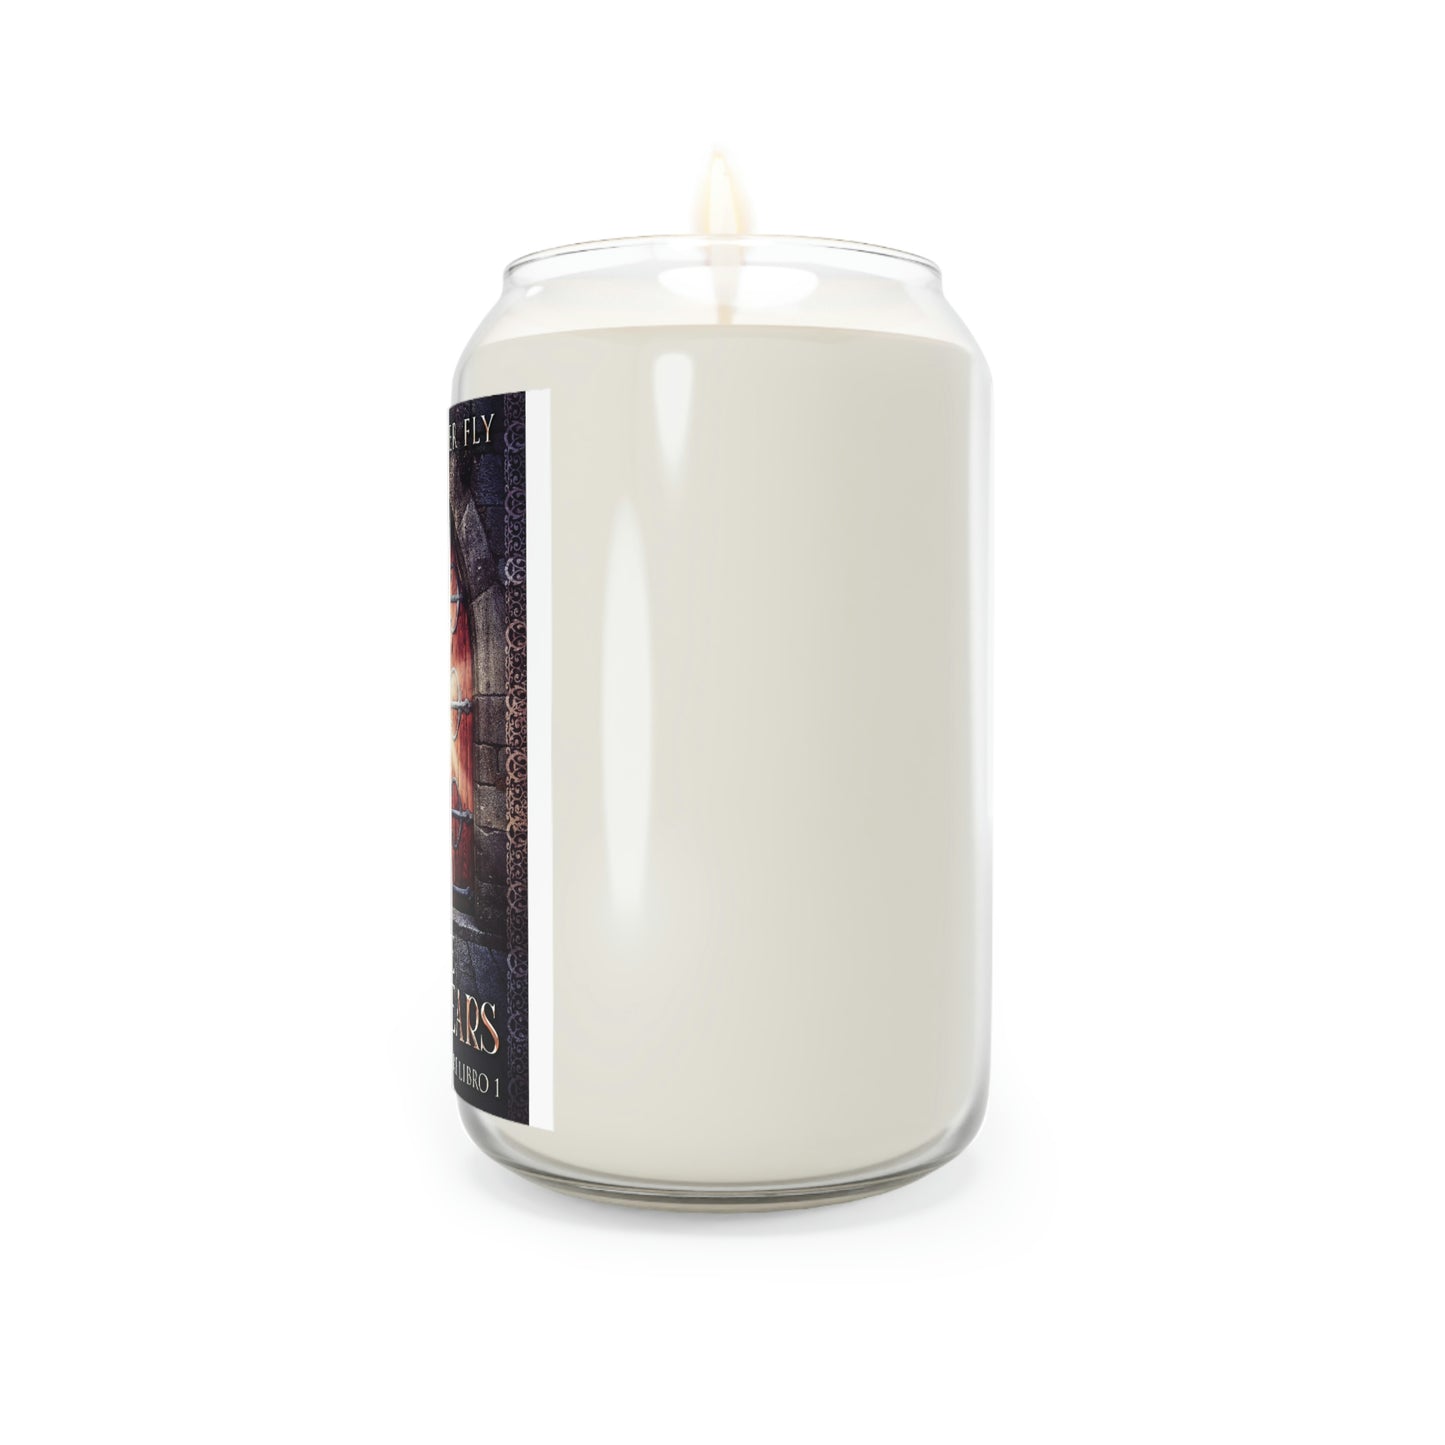 By The Gods's Ears - Scented Candle